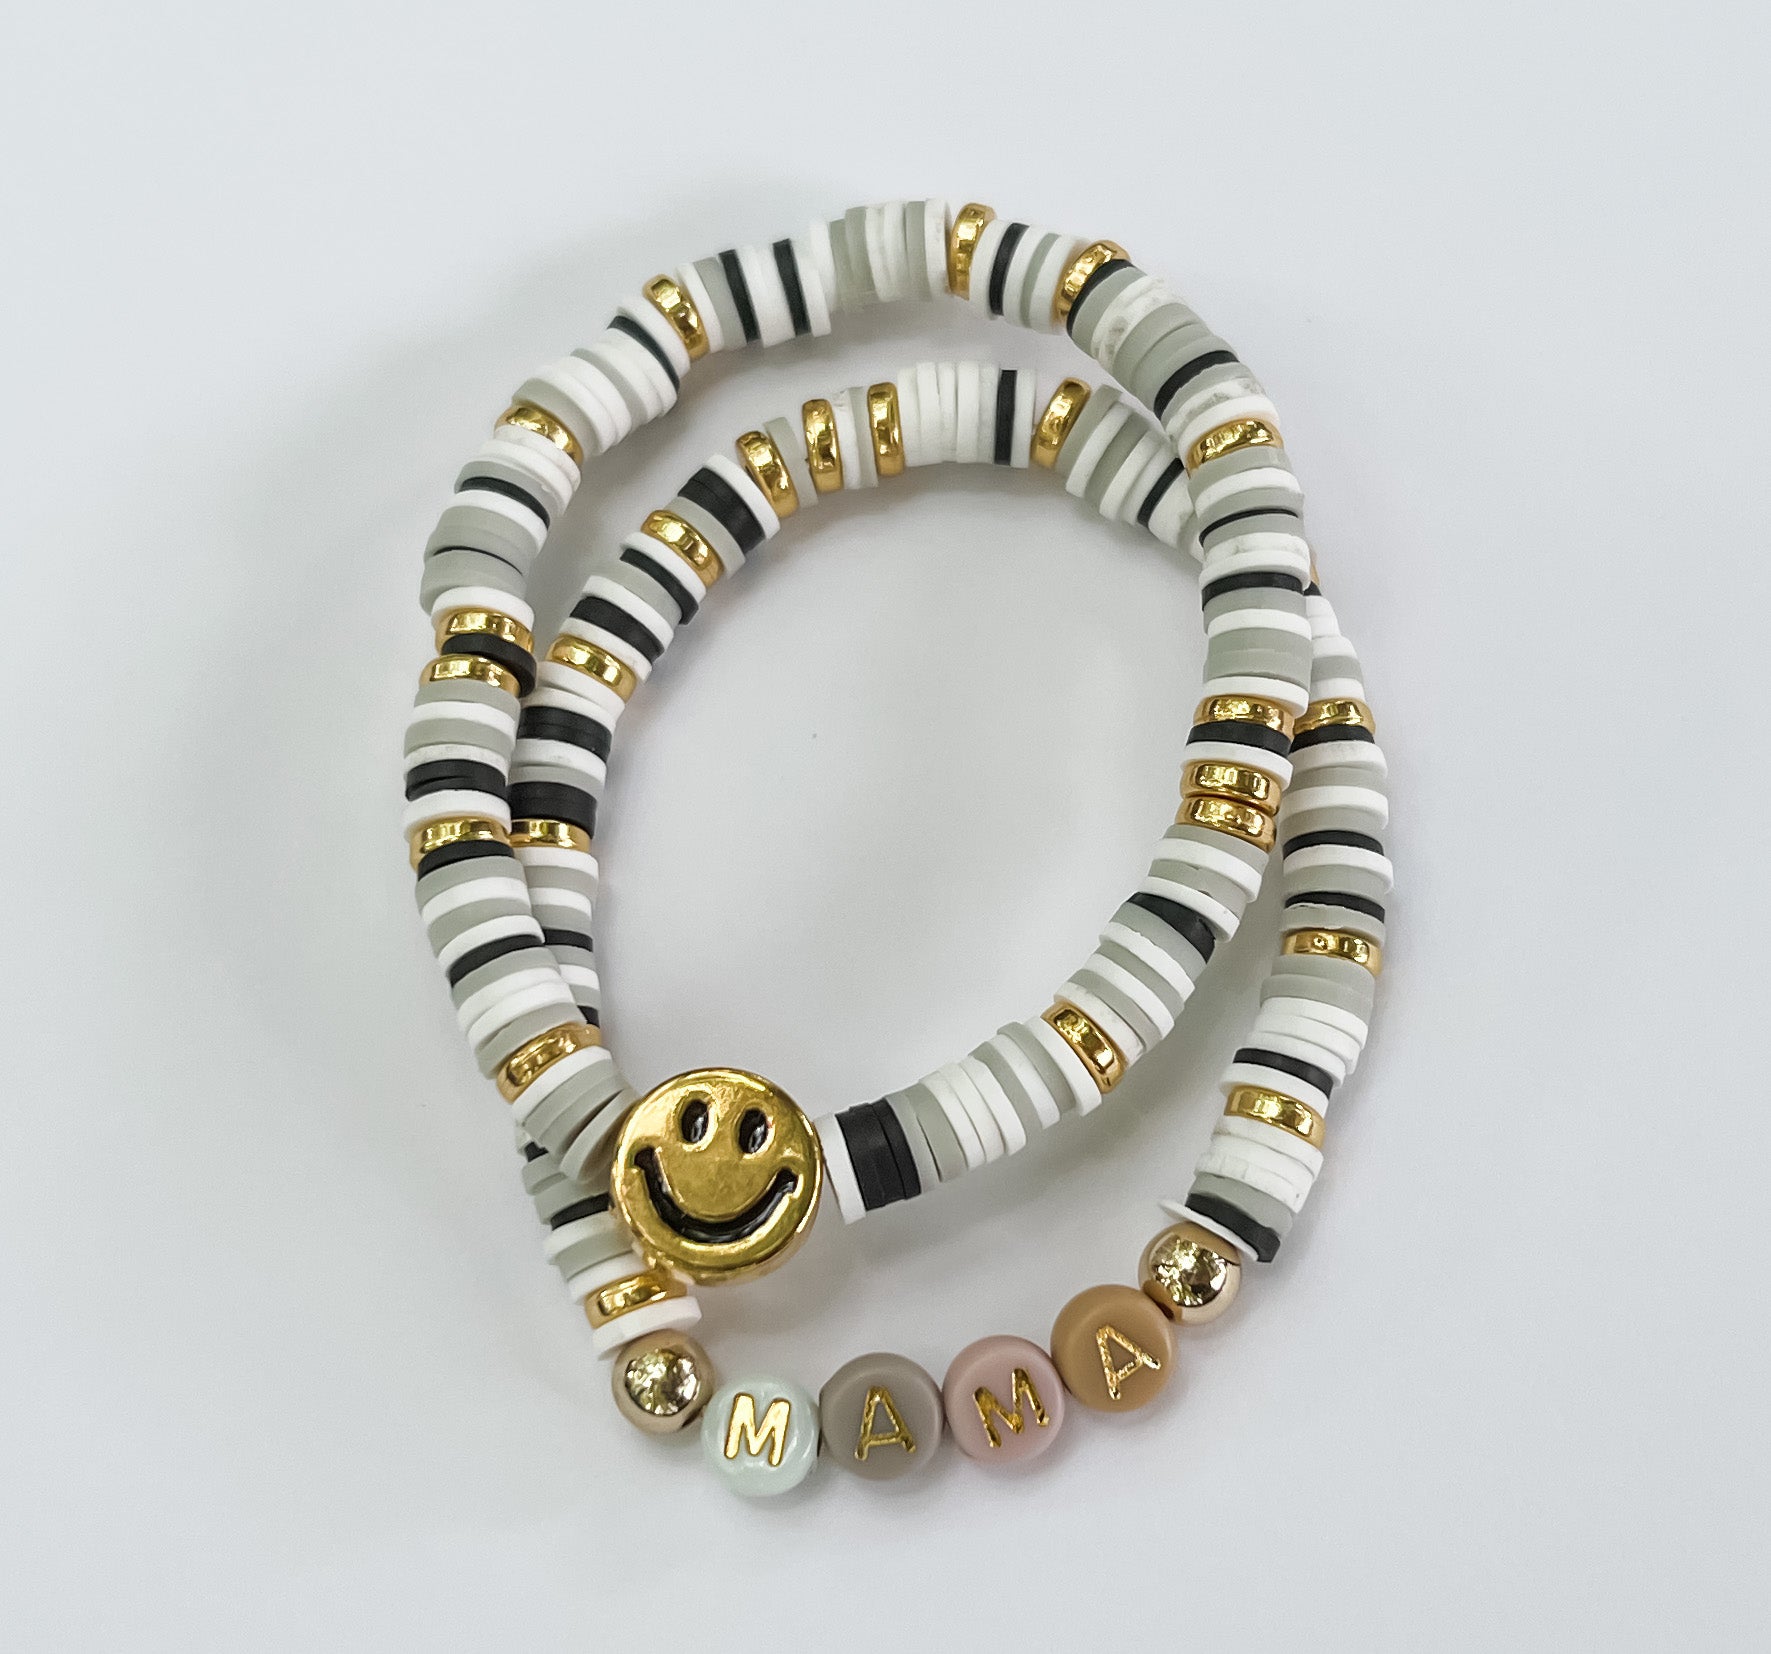 Black and Gold Clay Beads  Clay bracelet, Clay beads, Beaded